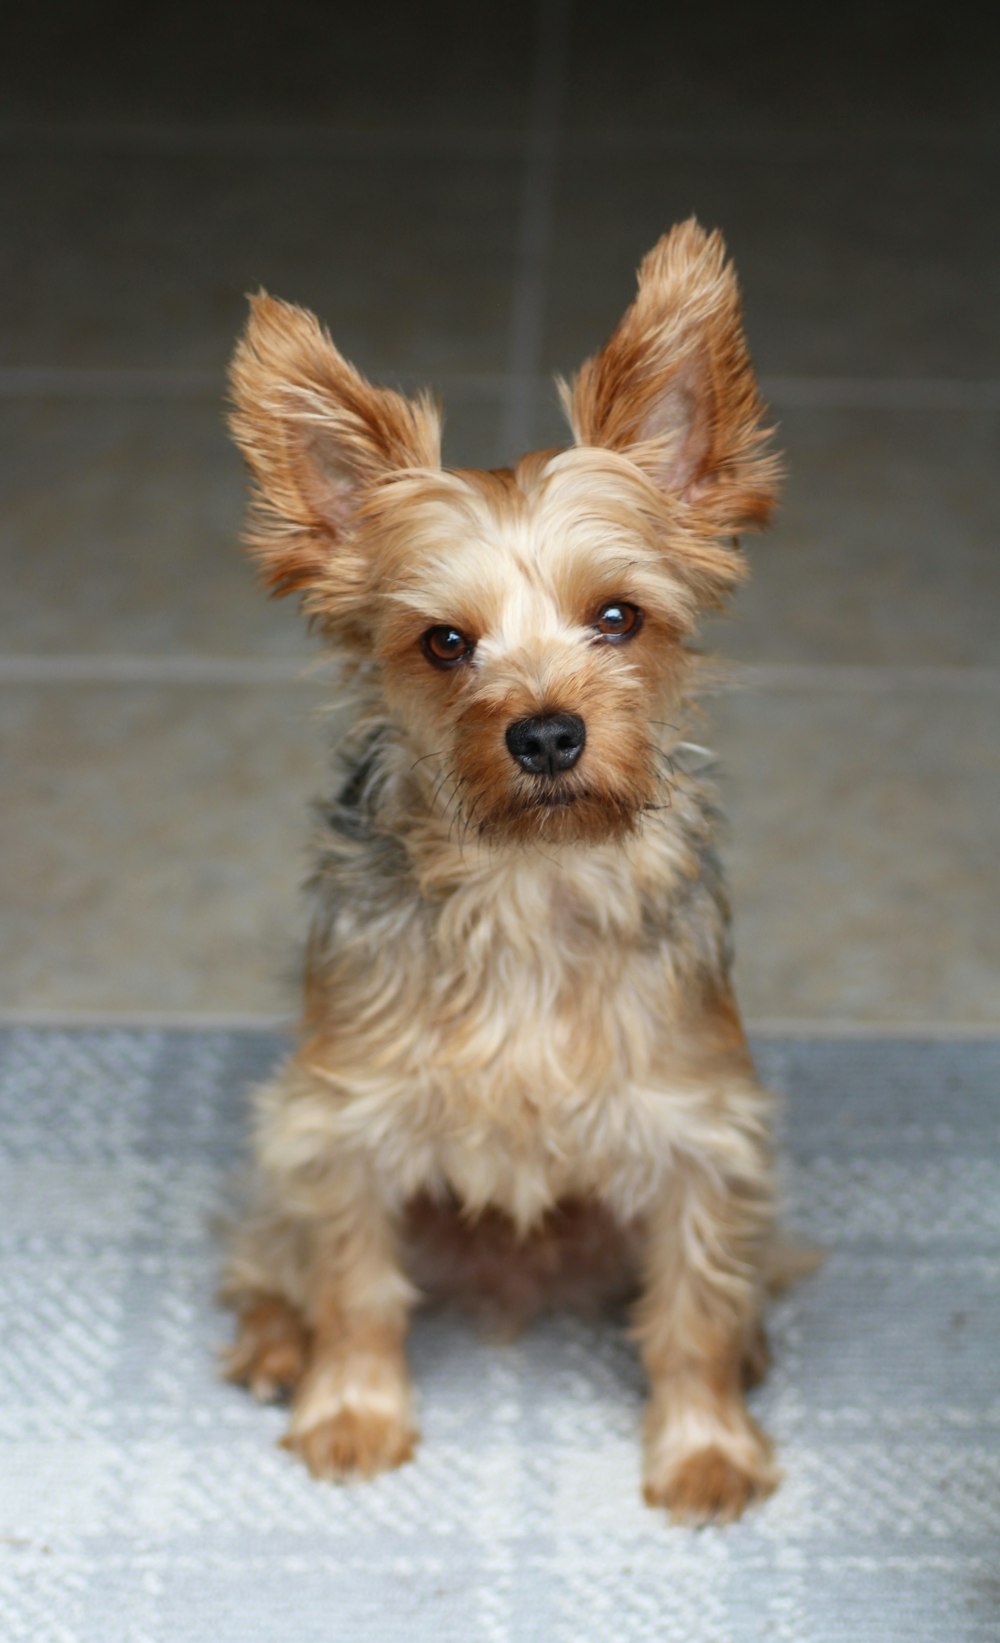 a small brown dog sitting on top of a tile floor